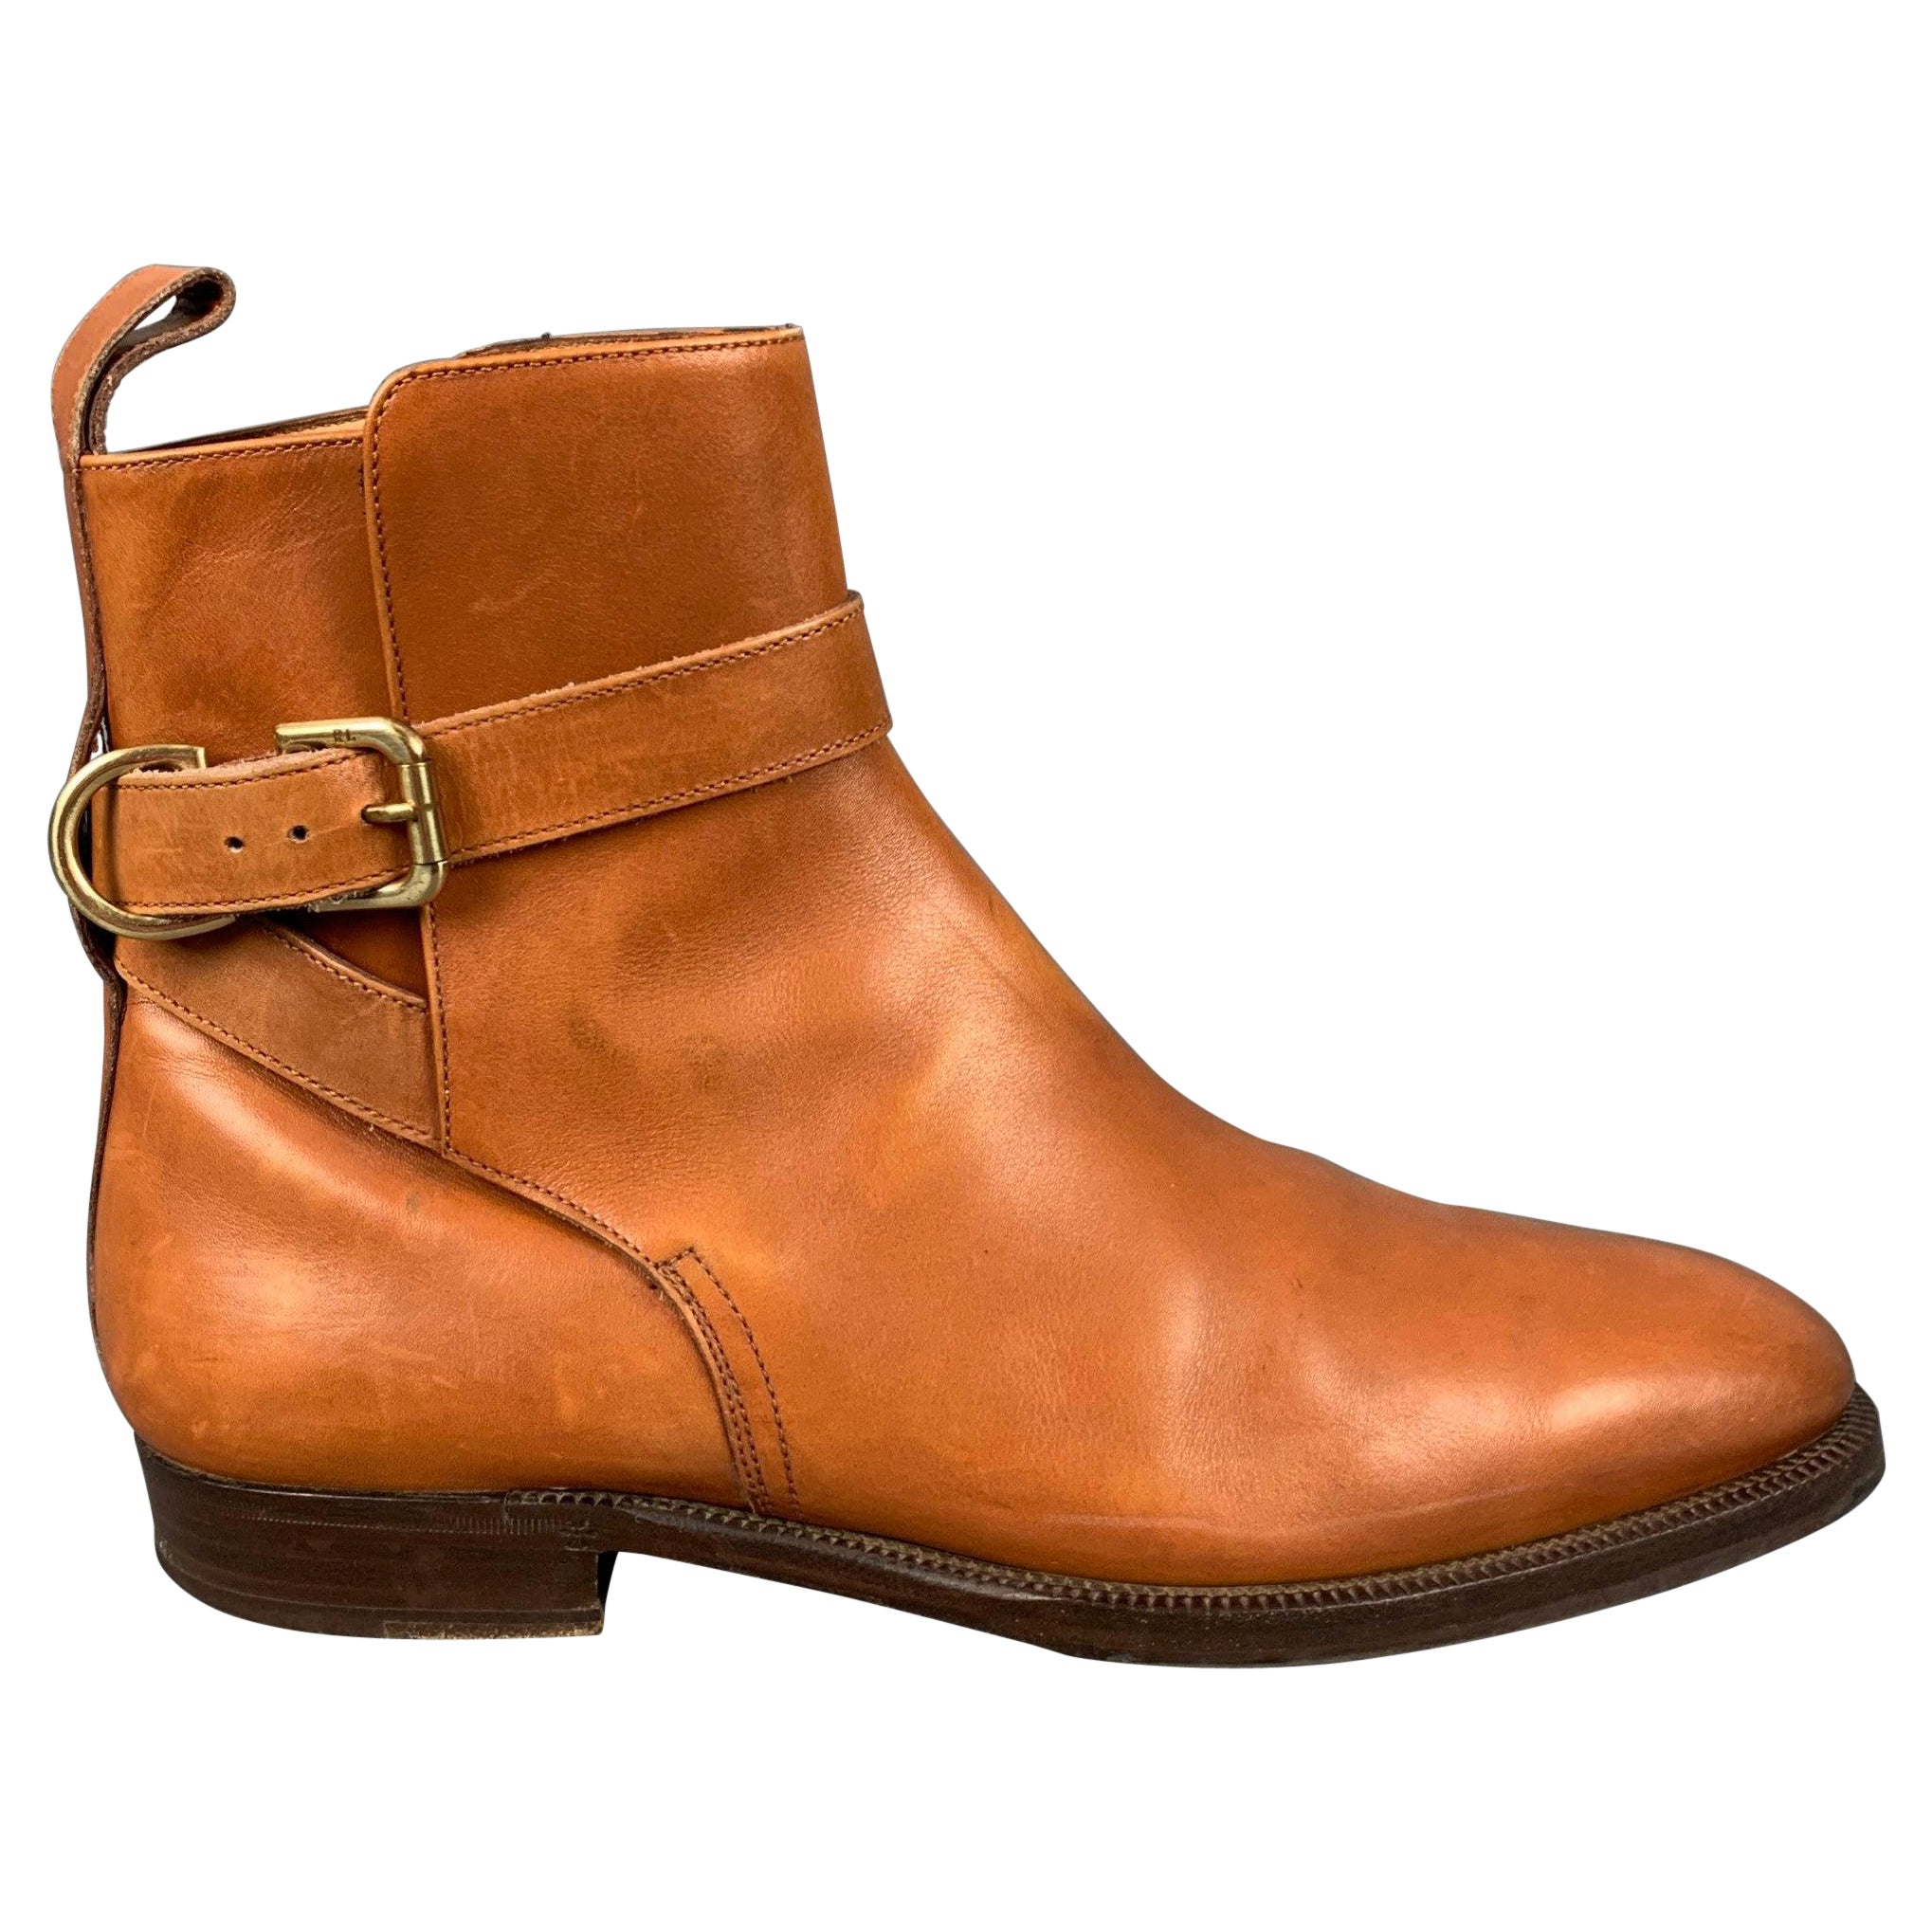 RALPH LAUREN Size 9 Camel Leather Ankle Strap Boots For Sale